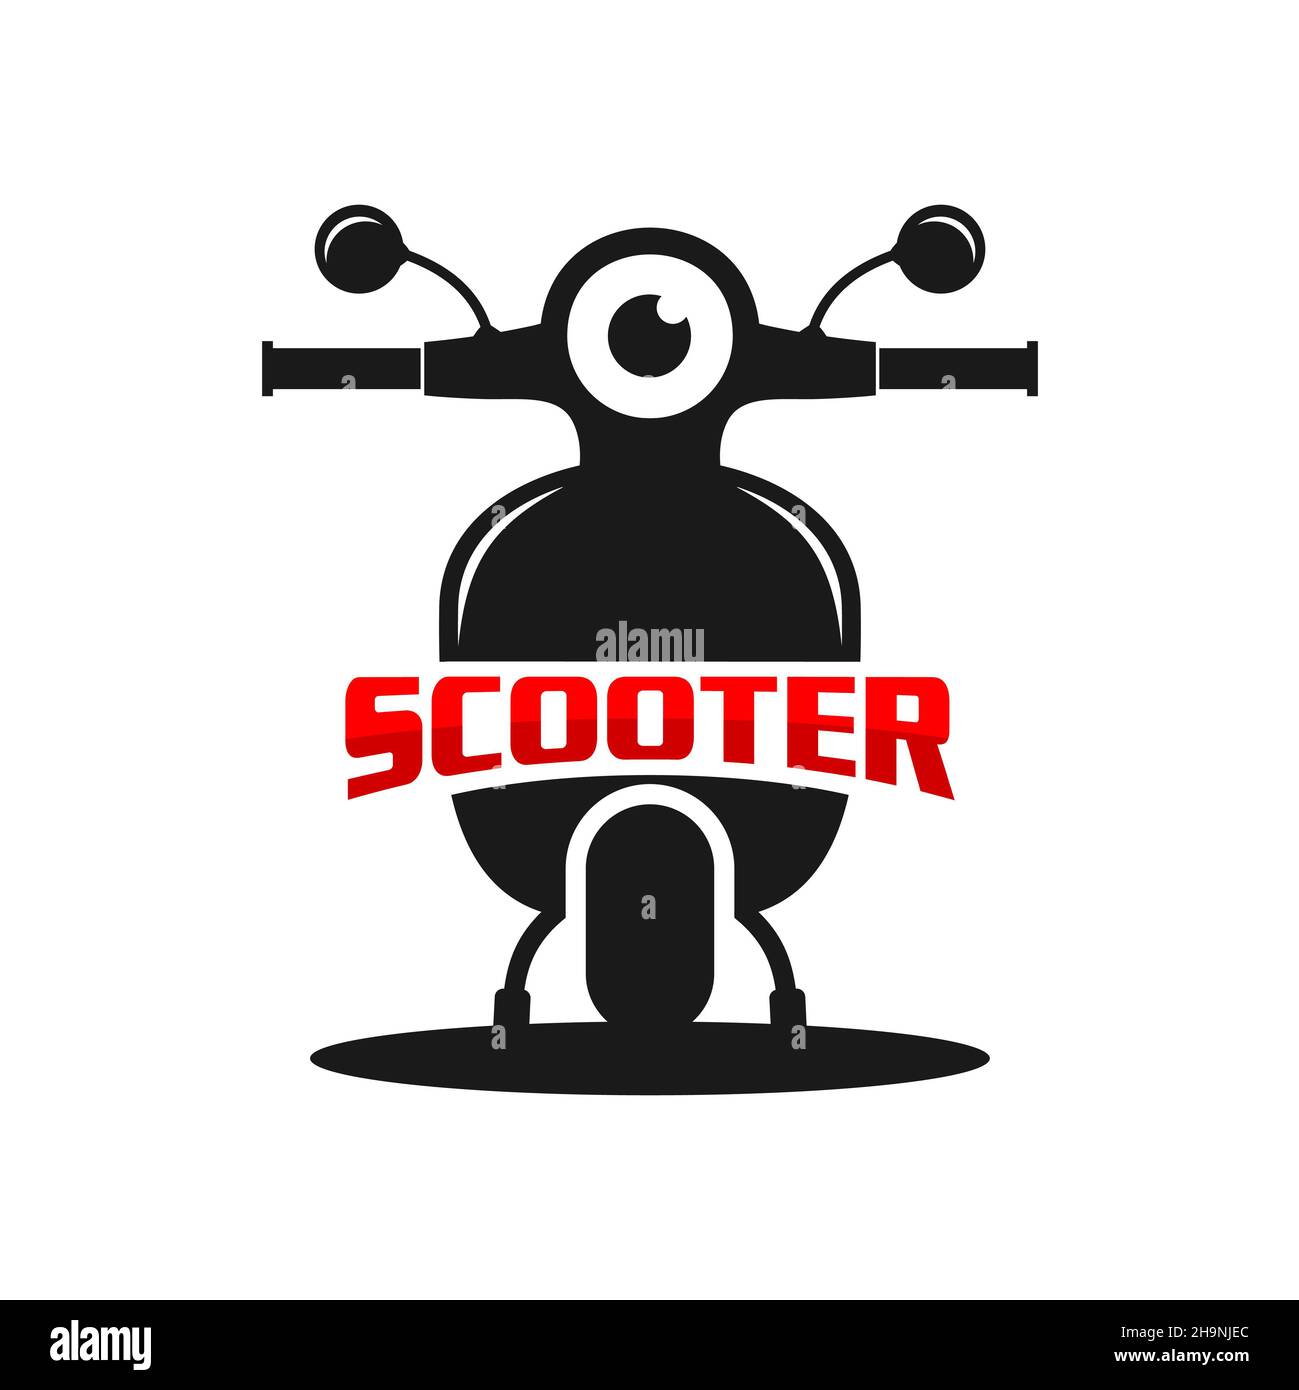 scooter logo design your company Stock Photo